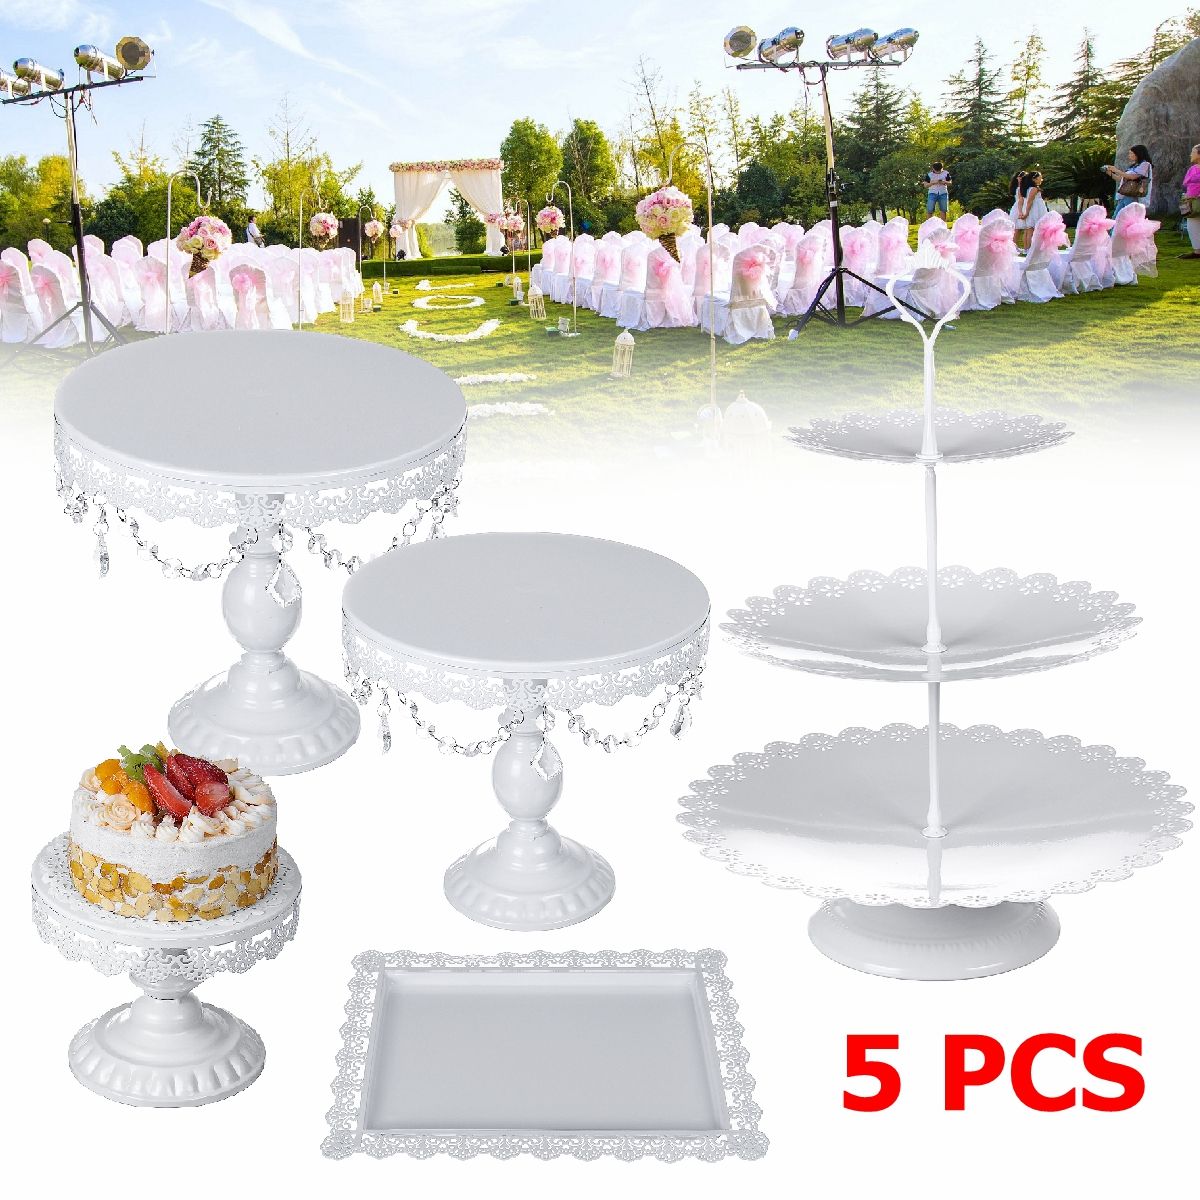 5PCS-Cake-Stand-Set-for-Wedding-Decorations-White-Table-Kit-Decorating-Party-Suppliers-for-Fondant-D-1602589